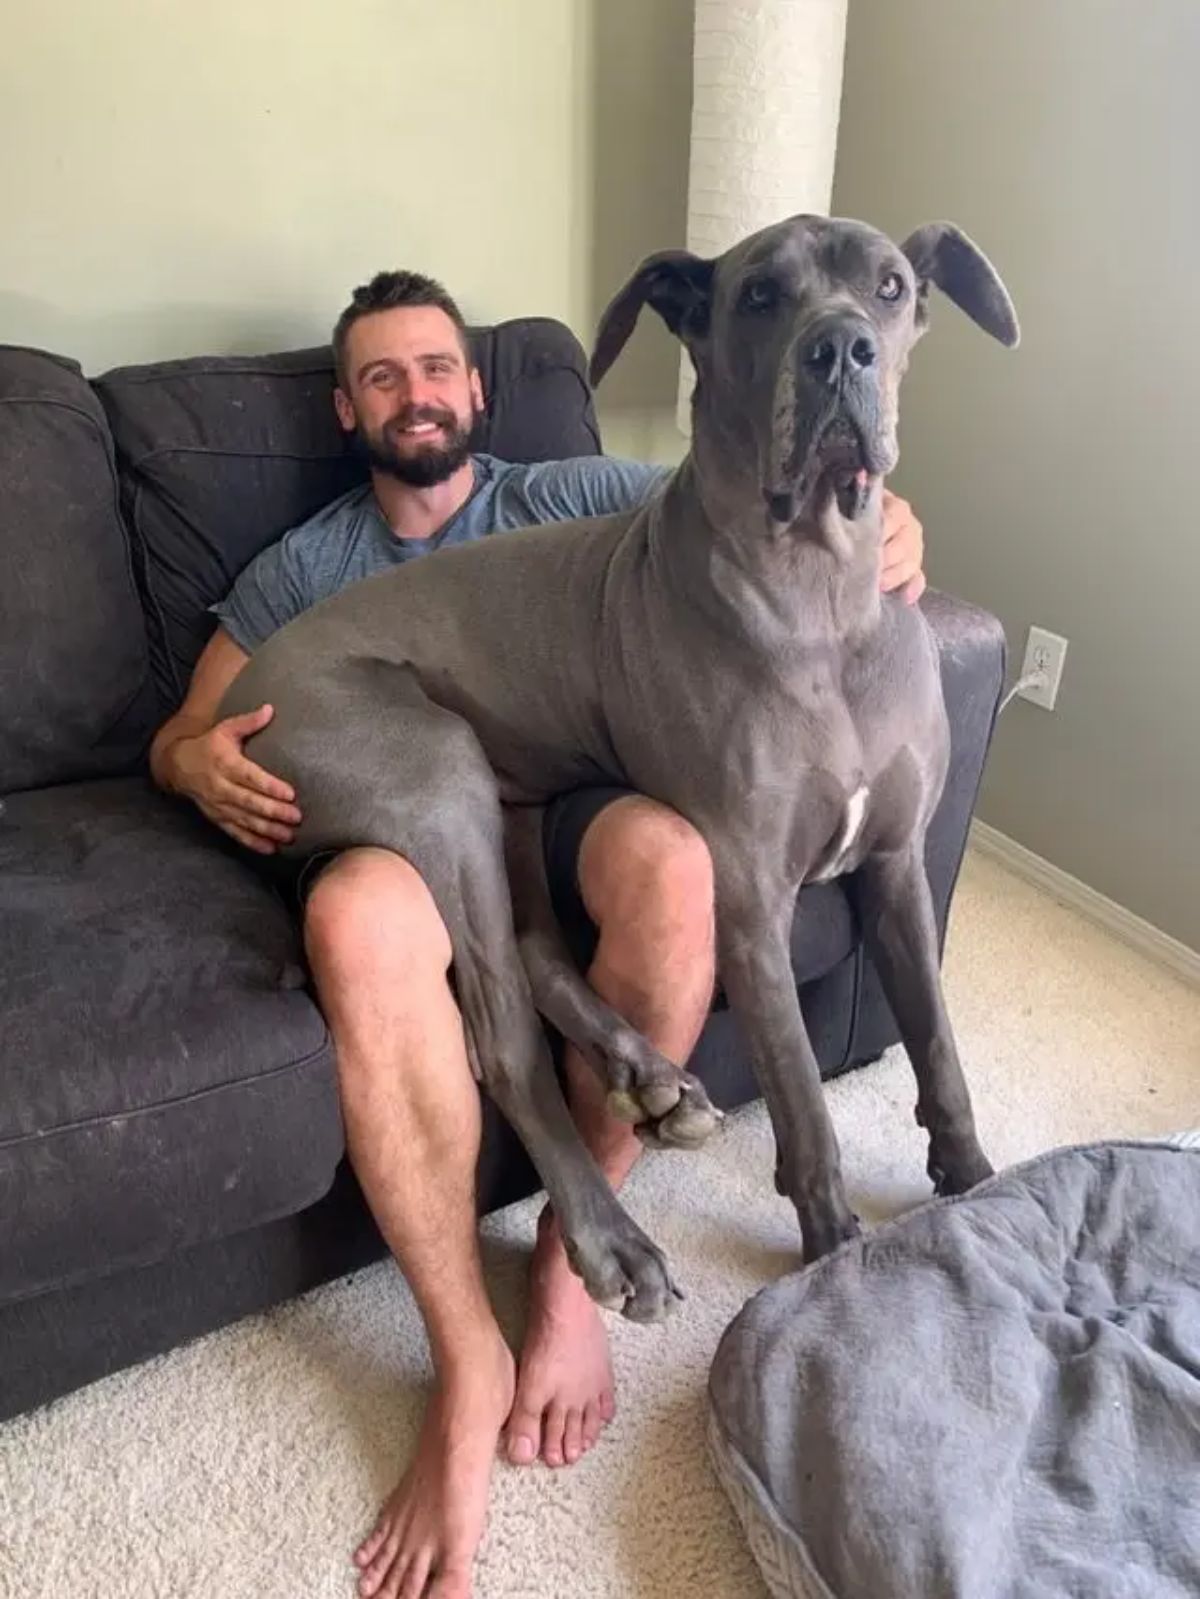 large grey dog sitting on a man's lap with the dig's front legs on the floor